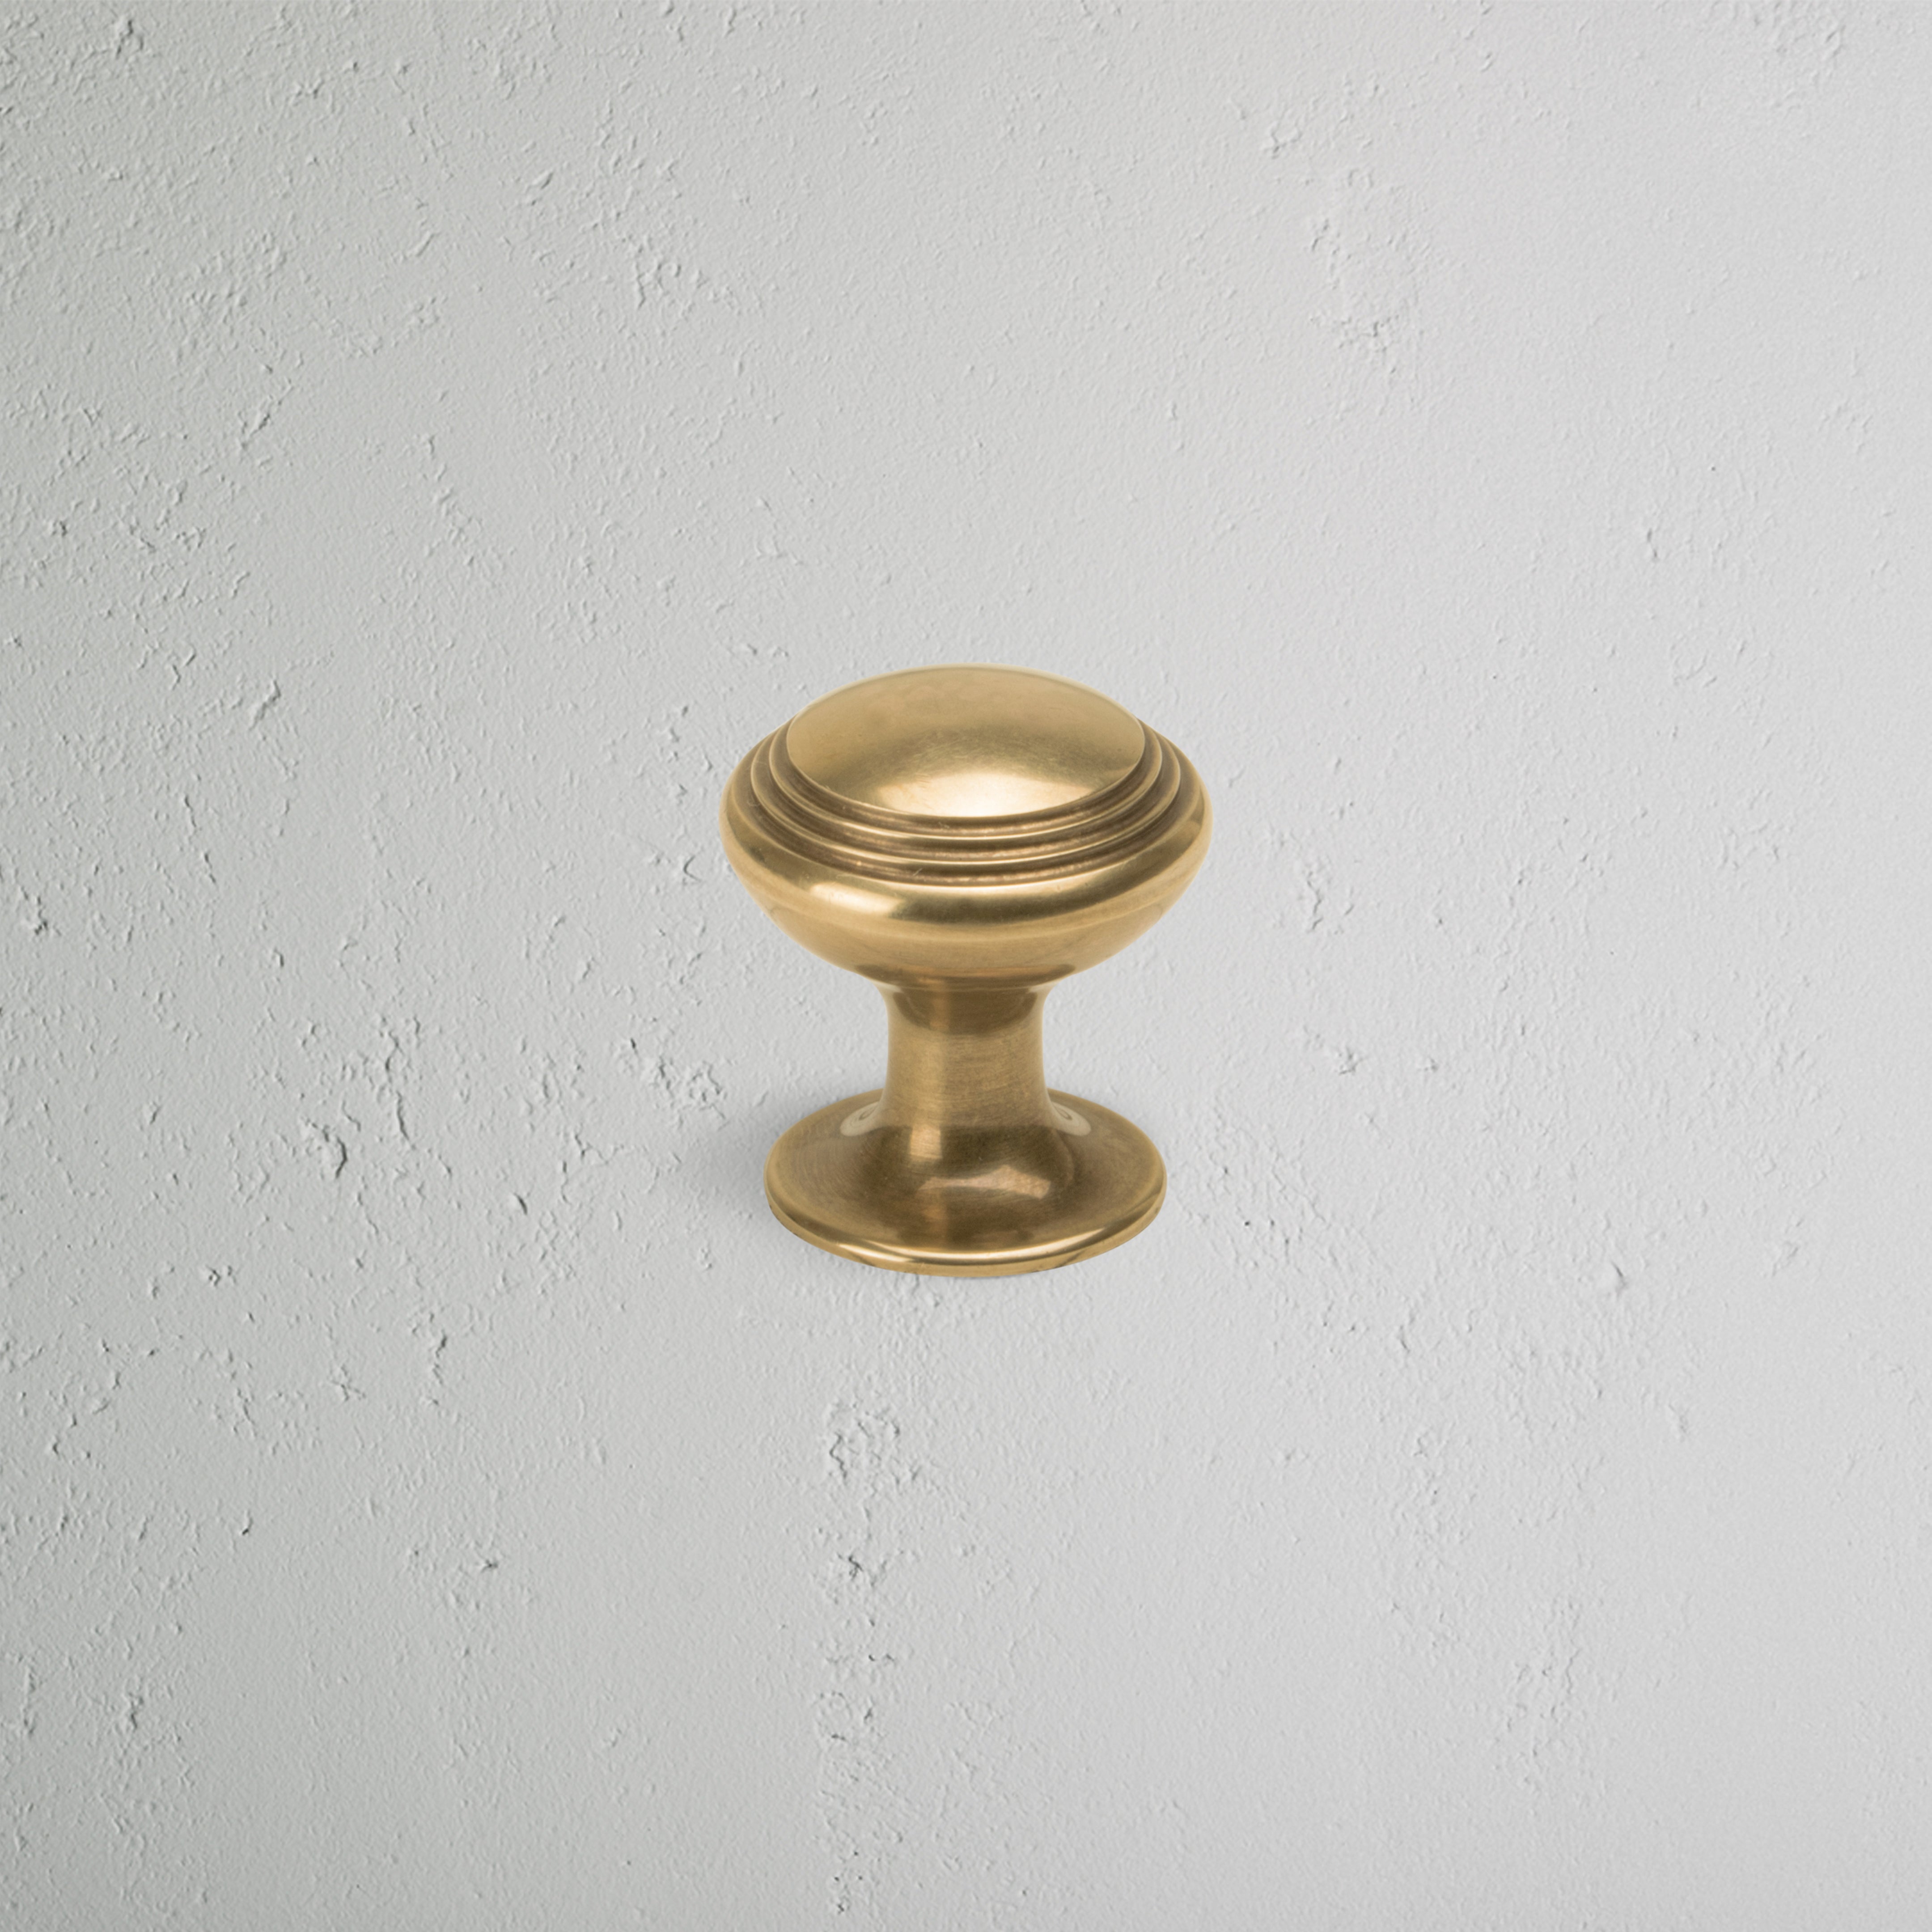 Touchpoint Beehive Mortice Knobset - 59mm - Antique Brass, IronmongeryDirect